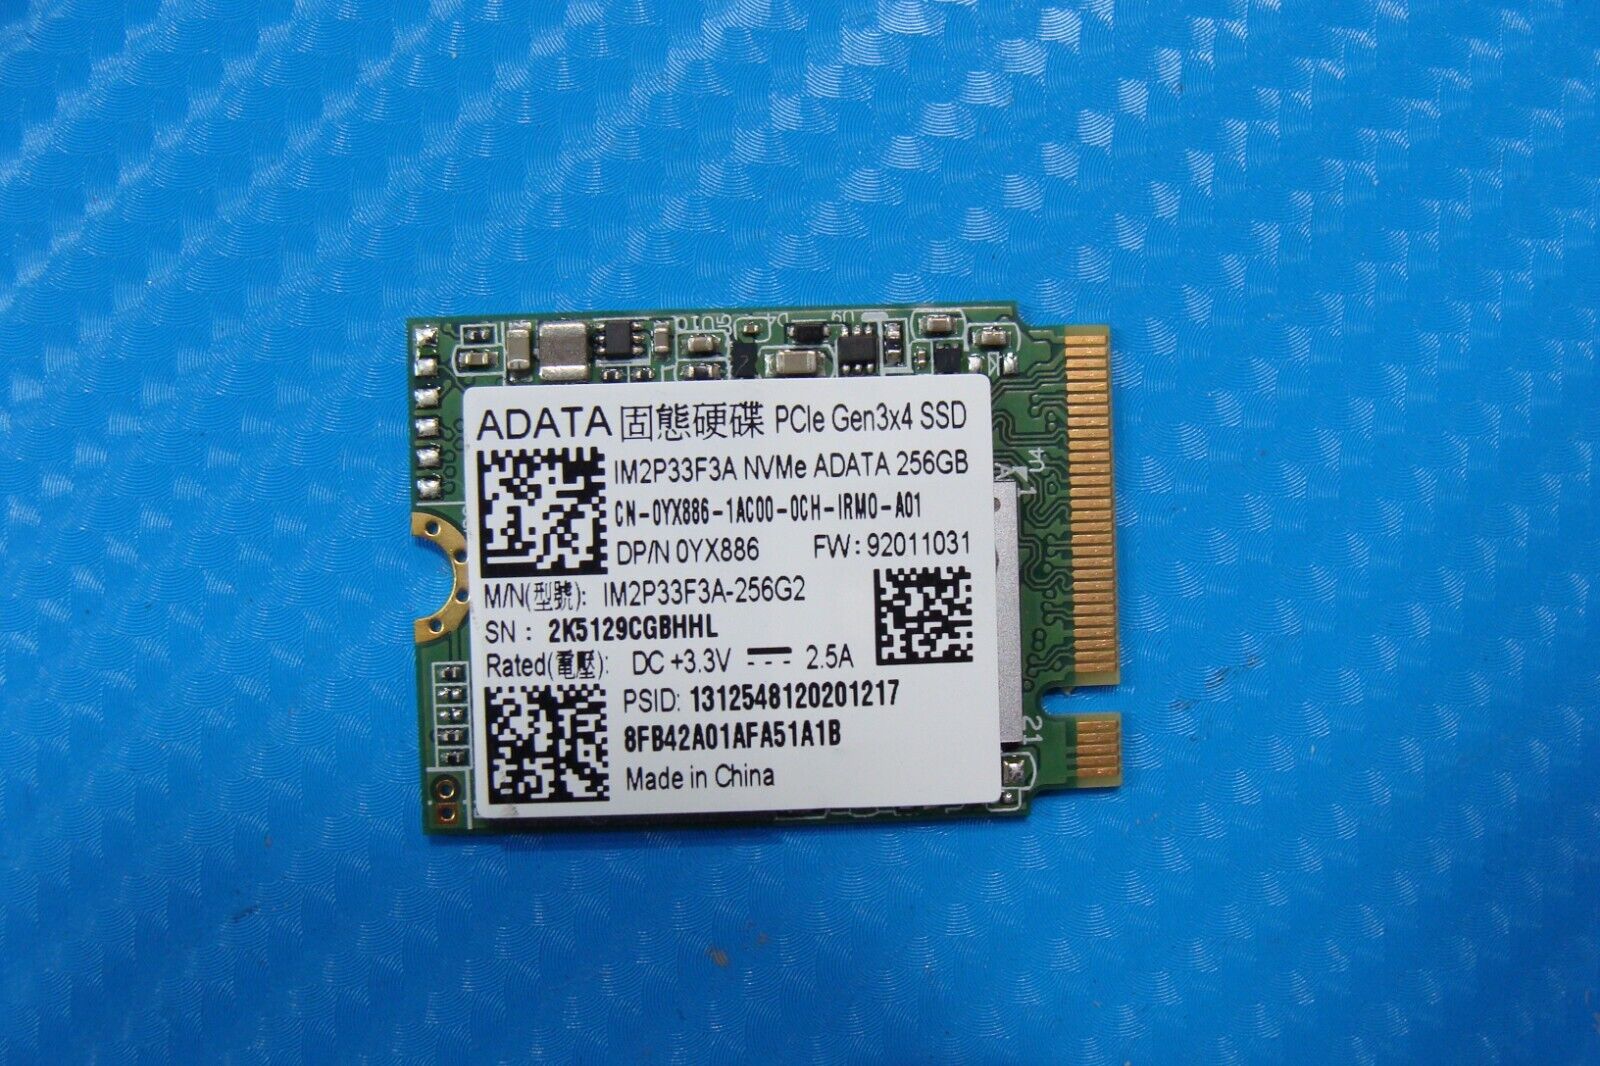 Dell 7405 2in1 ADATA 256GB M.2 NVMe SSD Solid State Drive IM2P33F3A-256G2 YX886